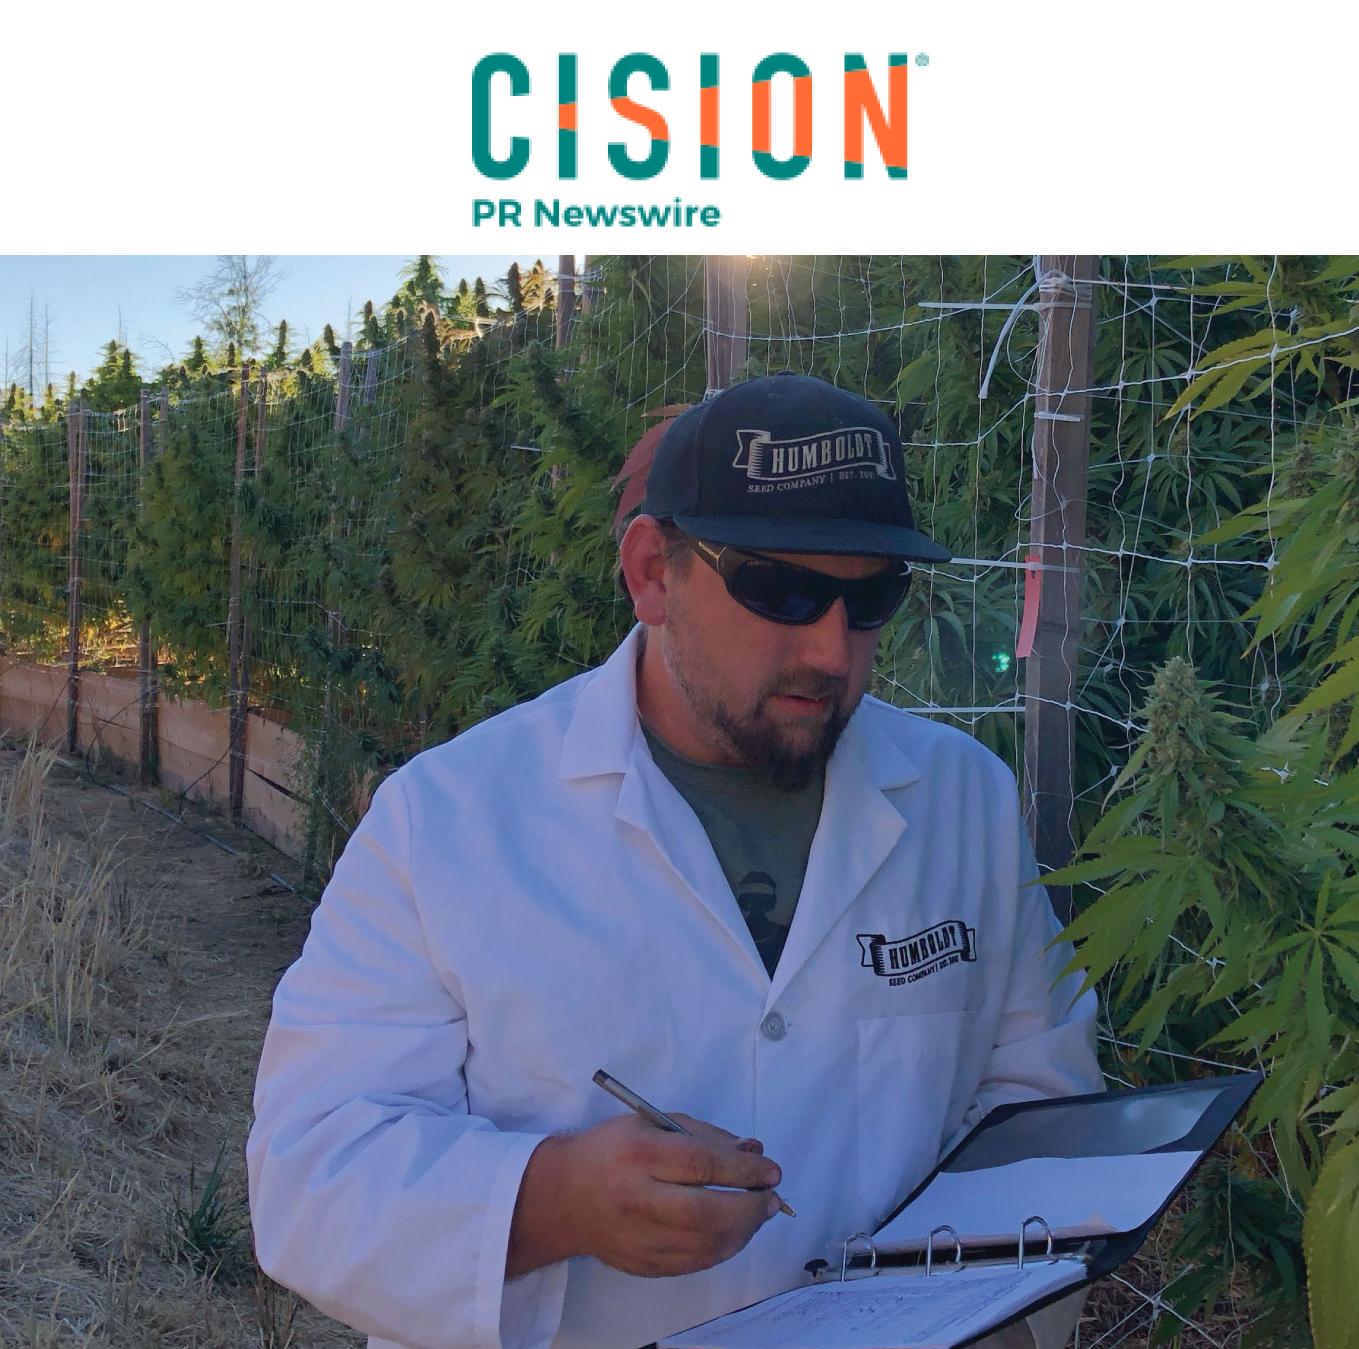 Nathaniel Pennington, founder & CEO of Humboldt Seed Company evaluates Humboldt cannabis varieties in California’s cannabis epicenter.